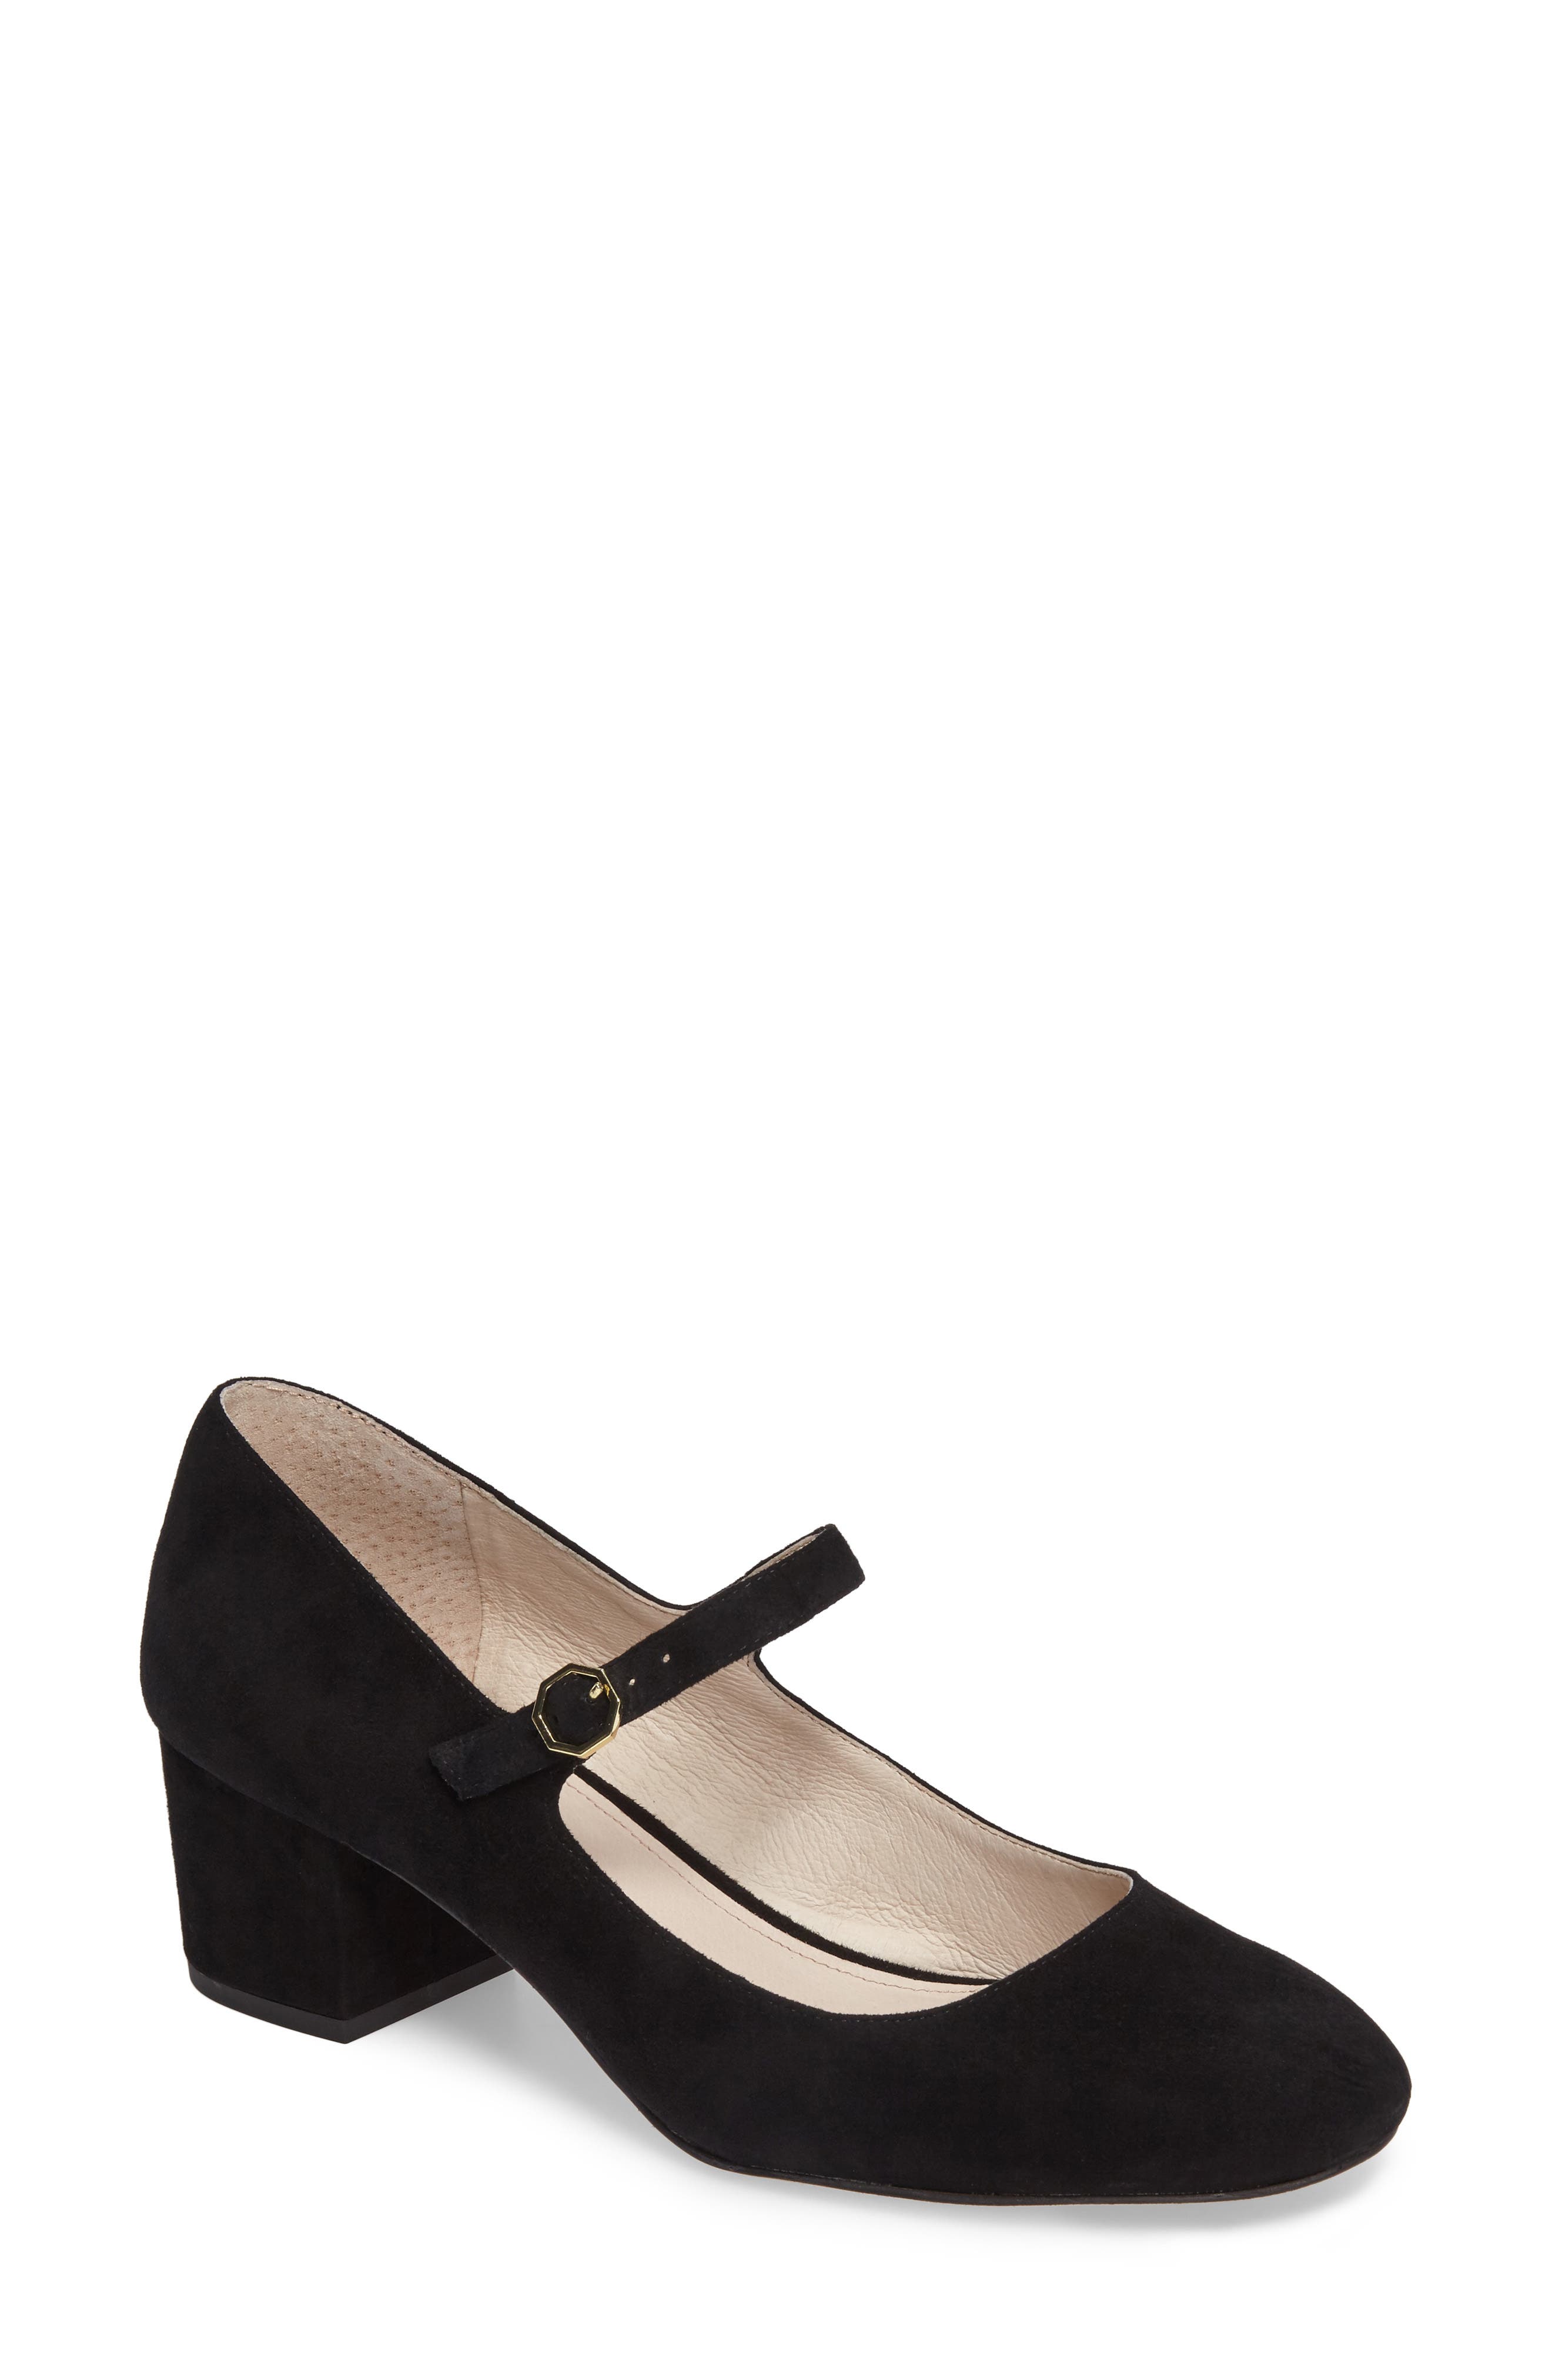 nordstrom mary janes